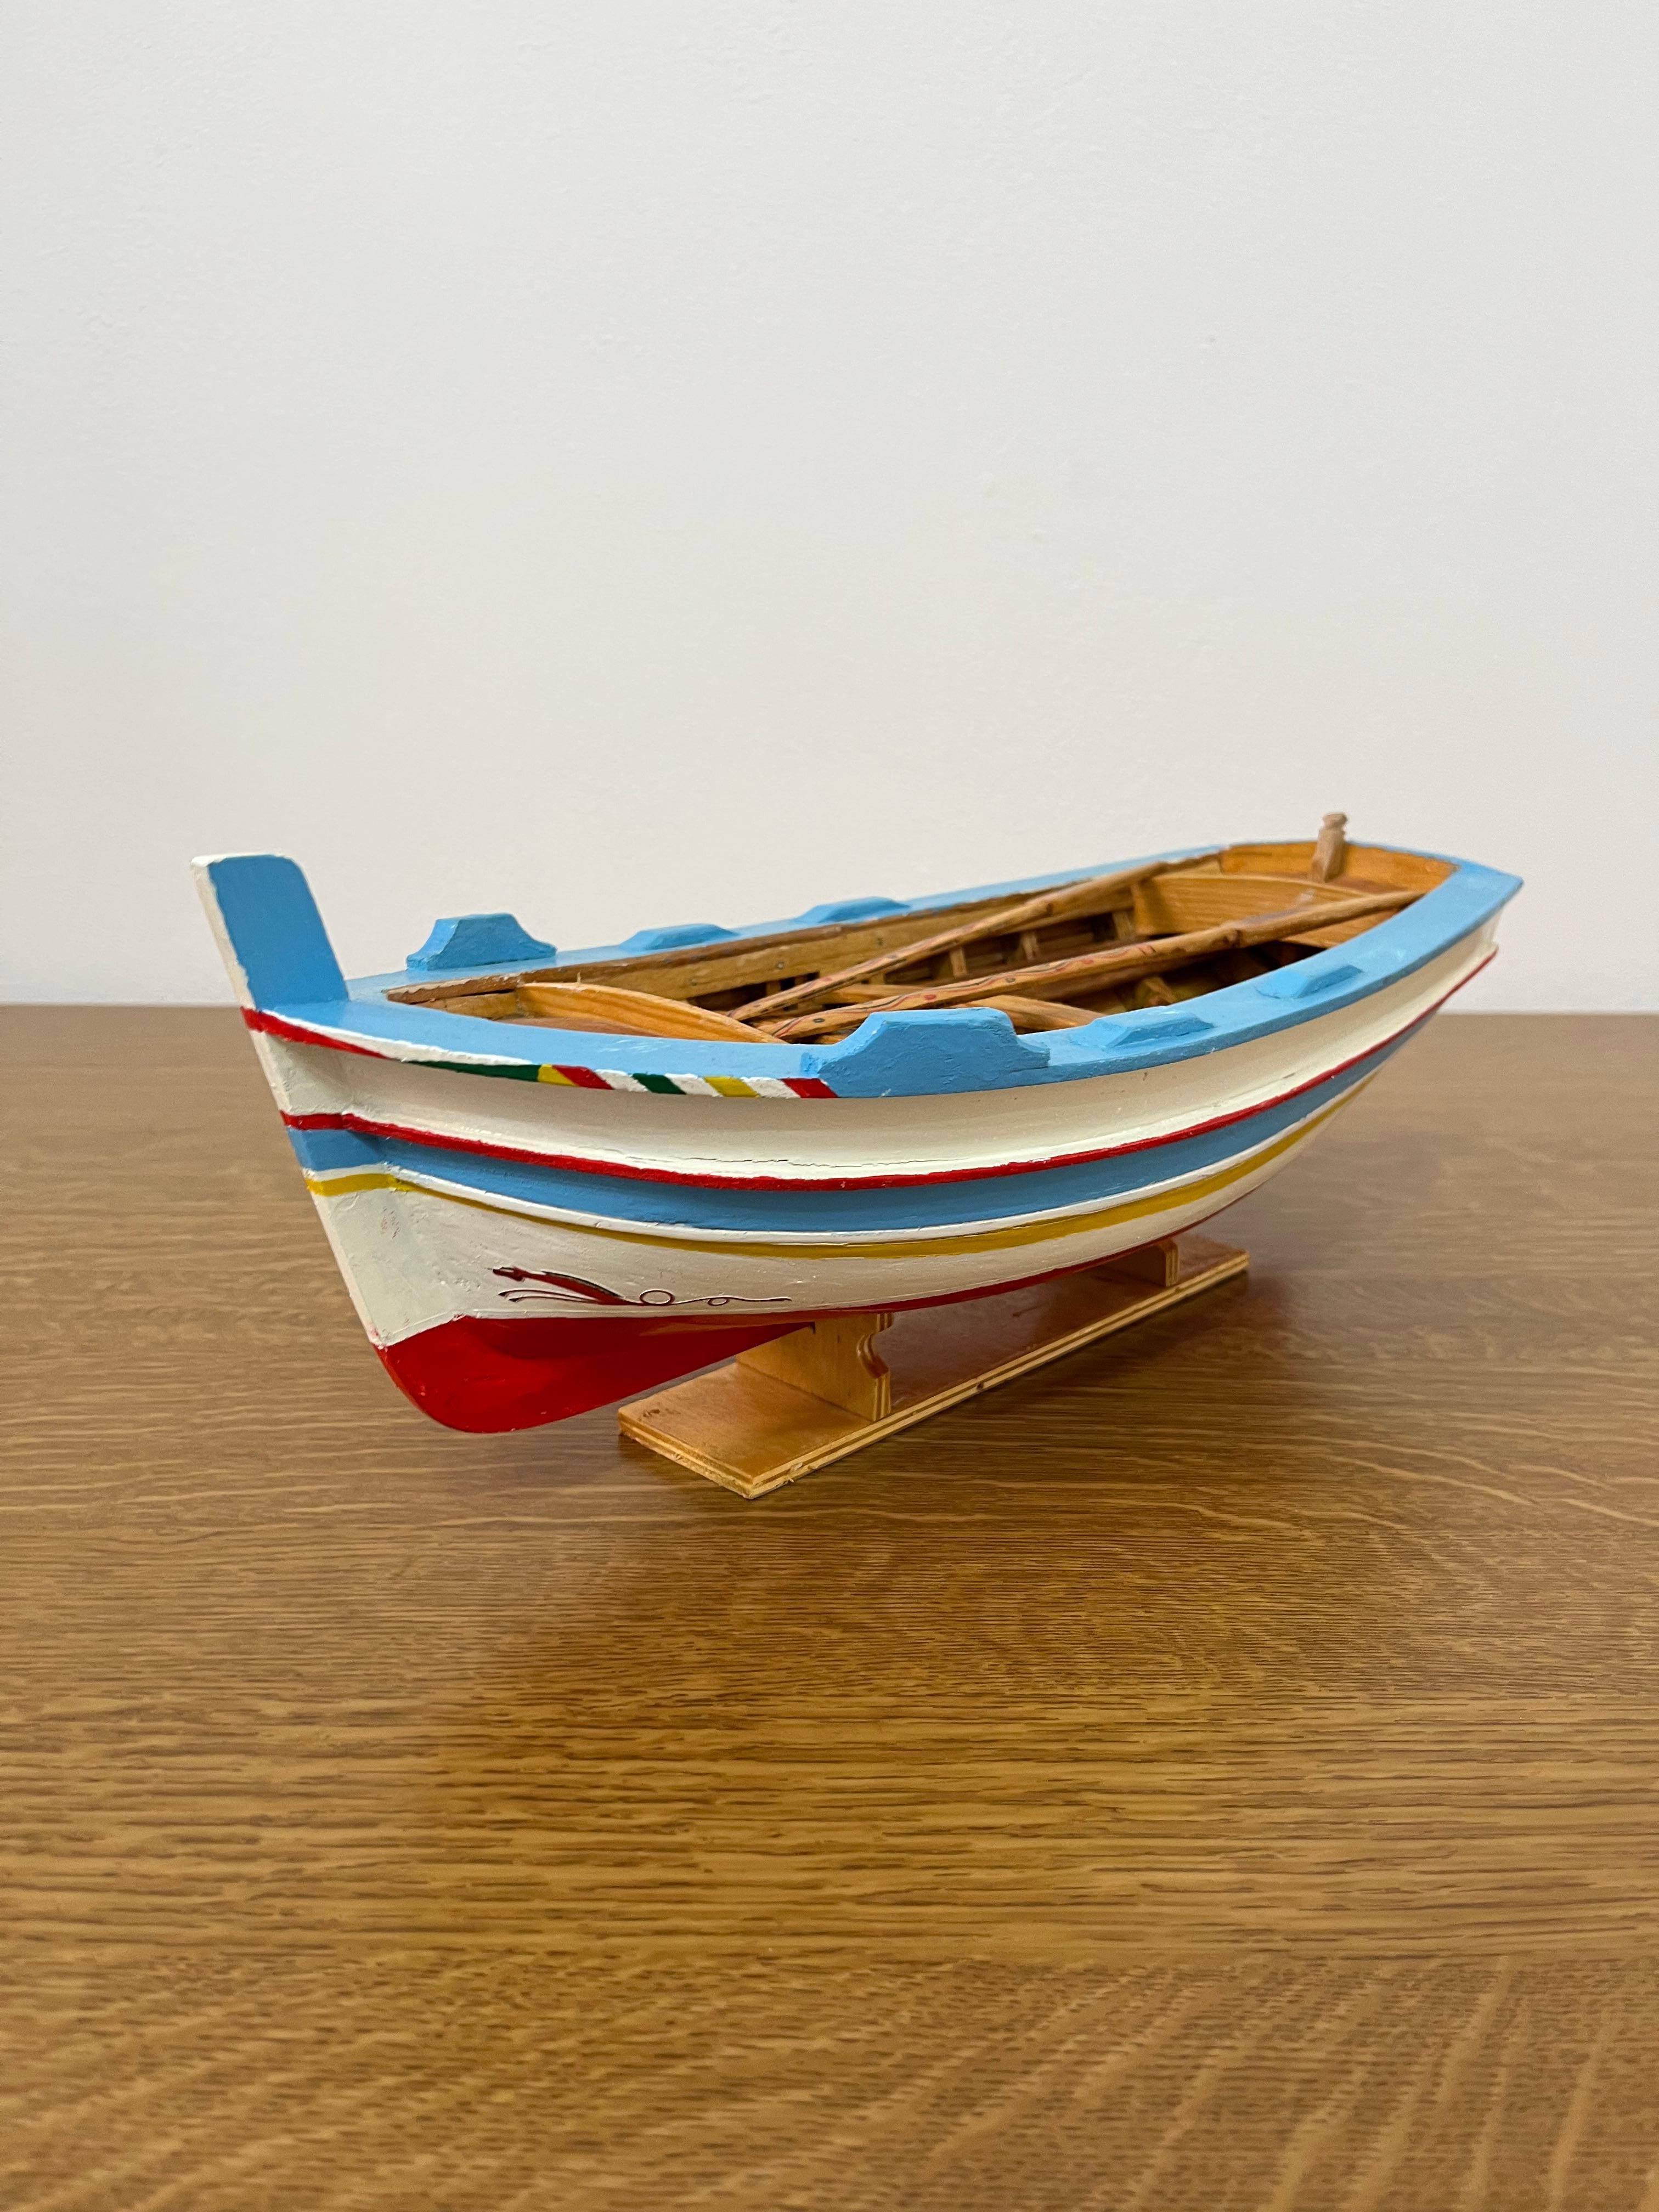 Miniature model of a Sicilian fishing boat, called a 